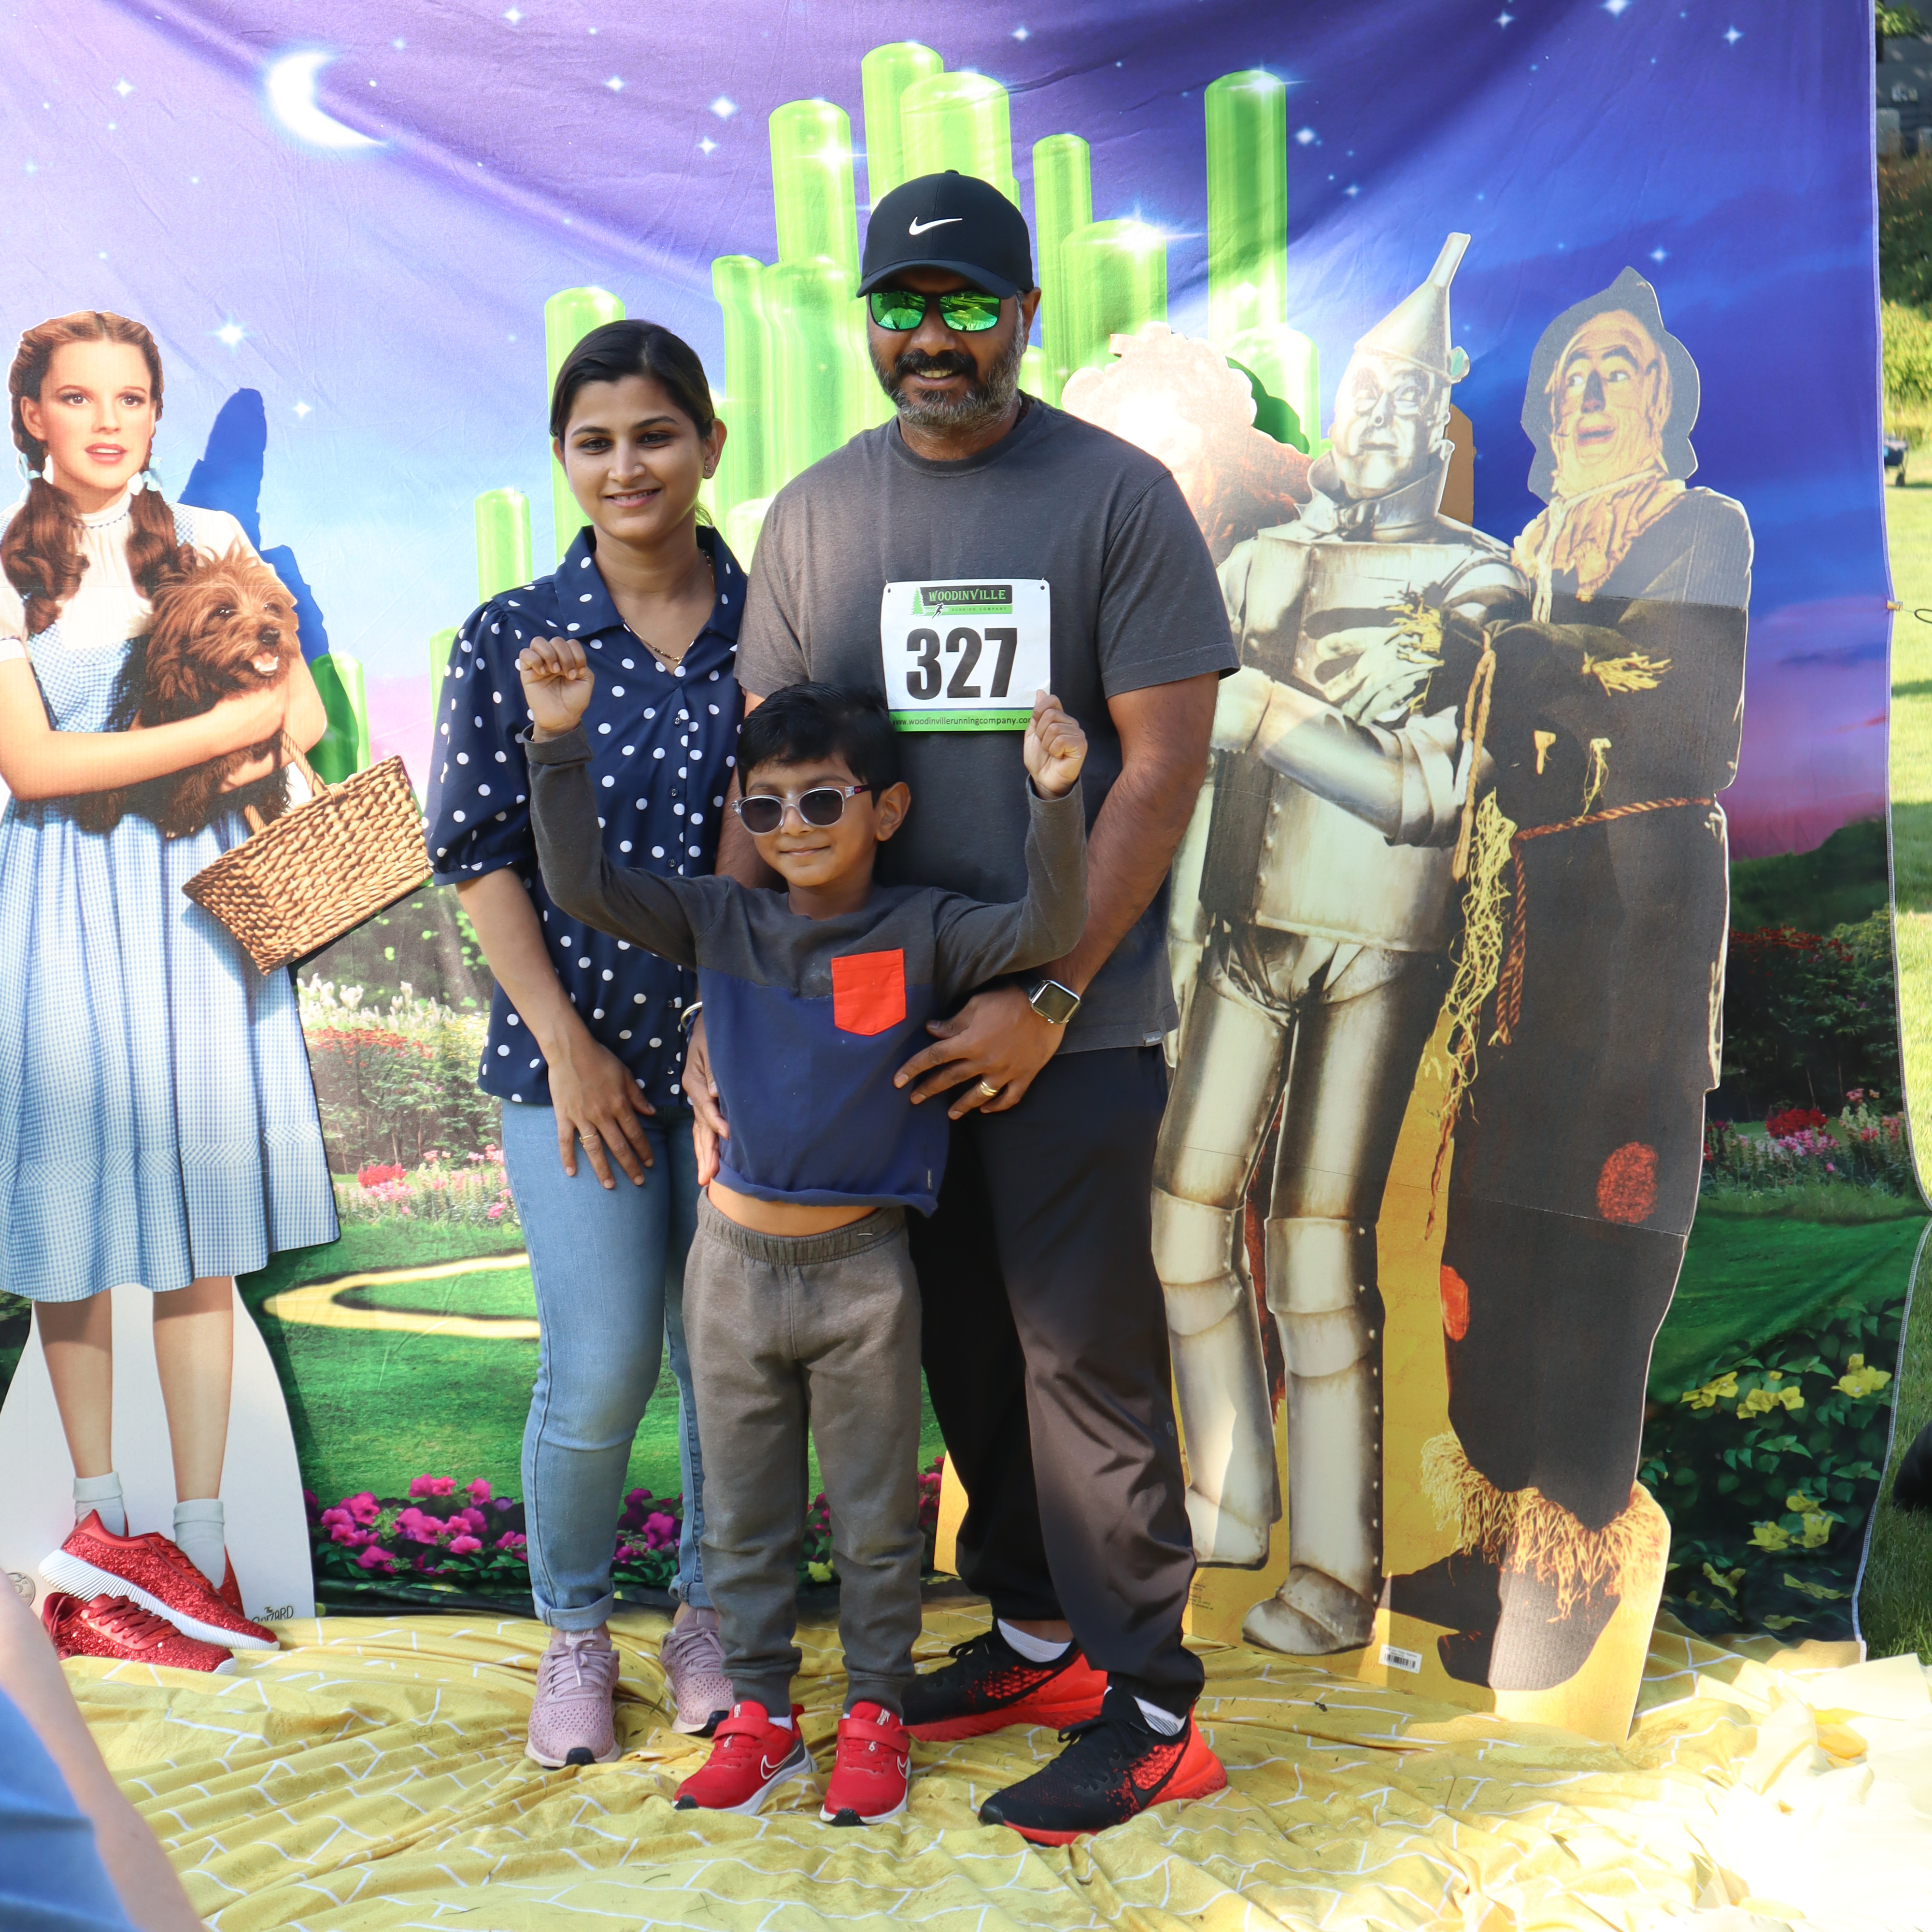 I Love My City 5k for Foster Care and Adoption – RacePenguin